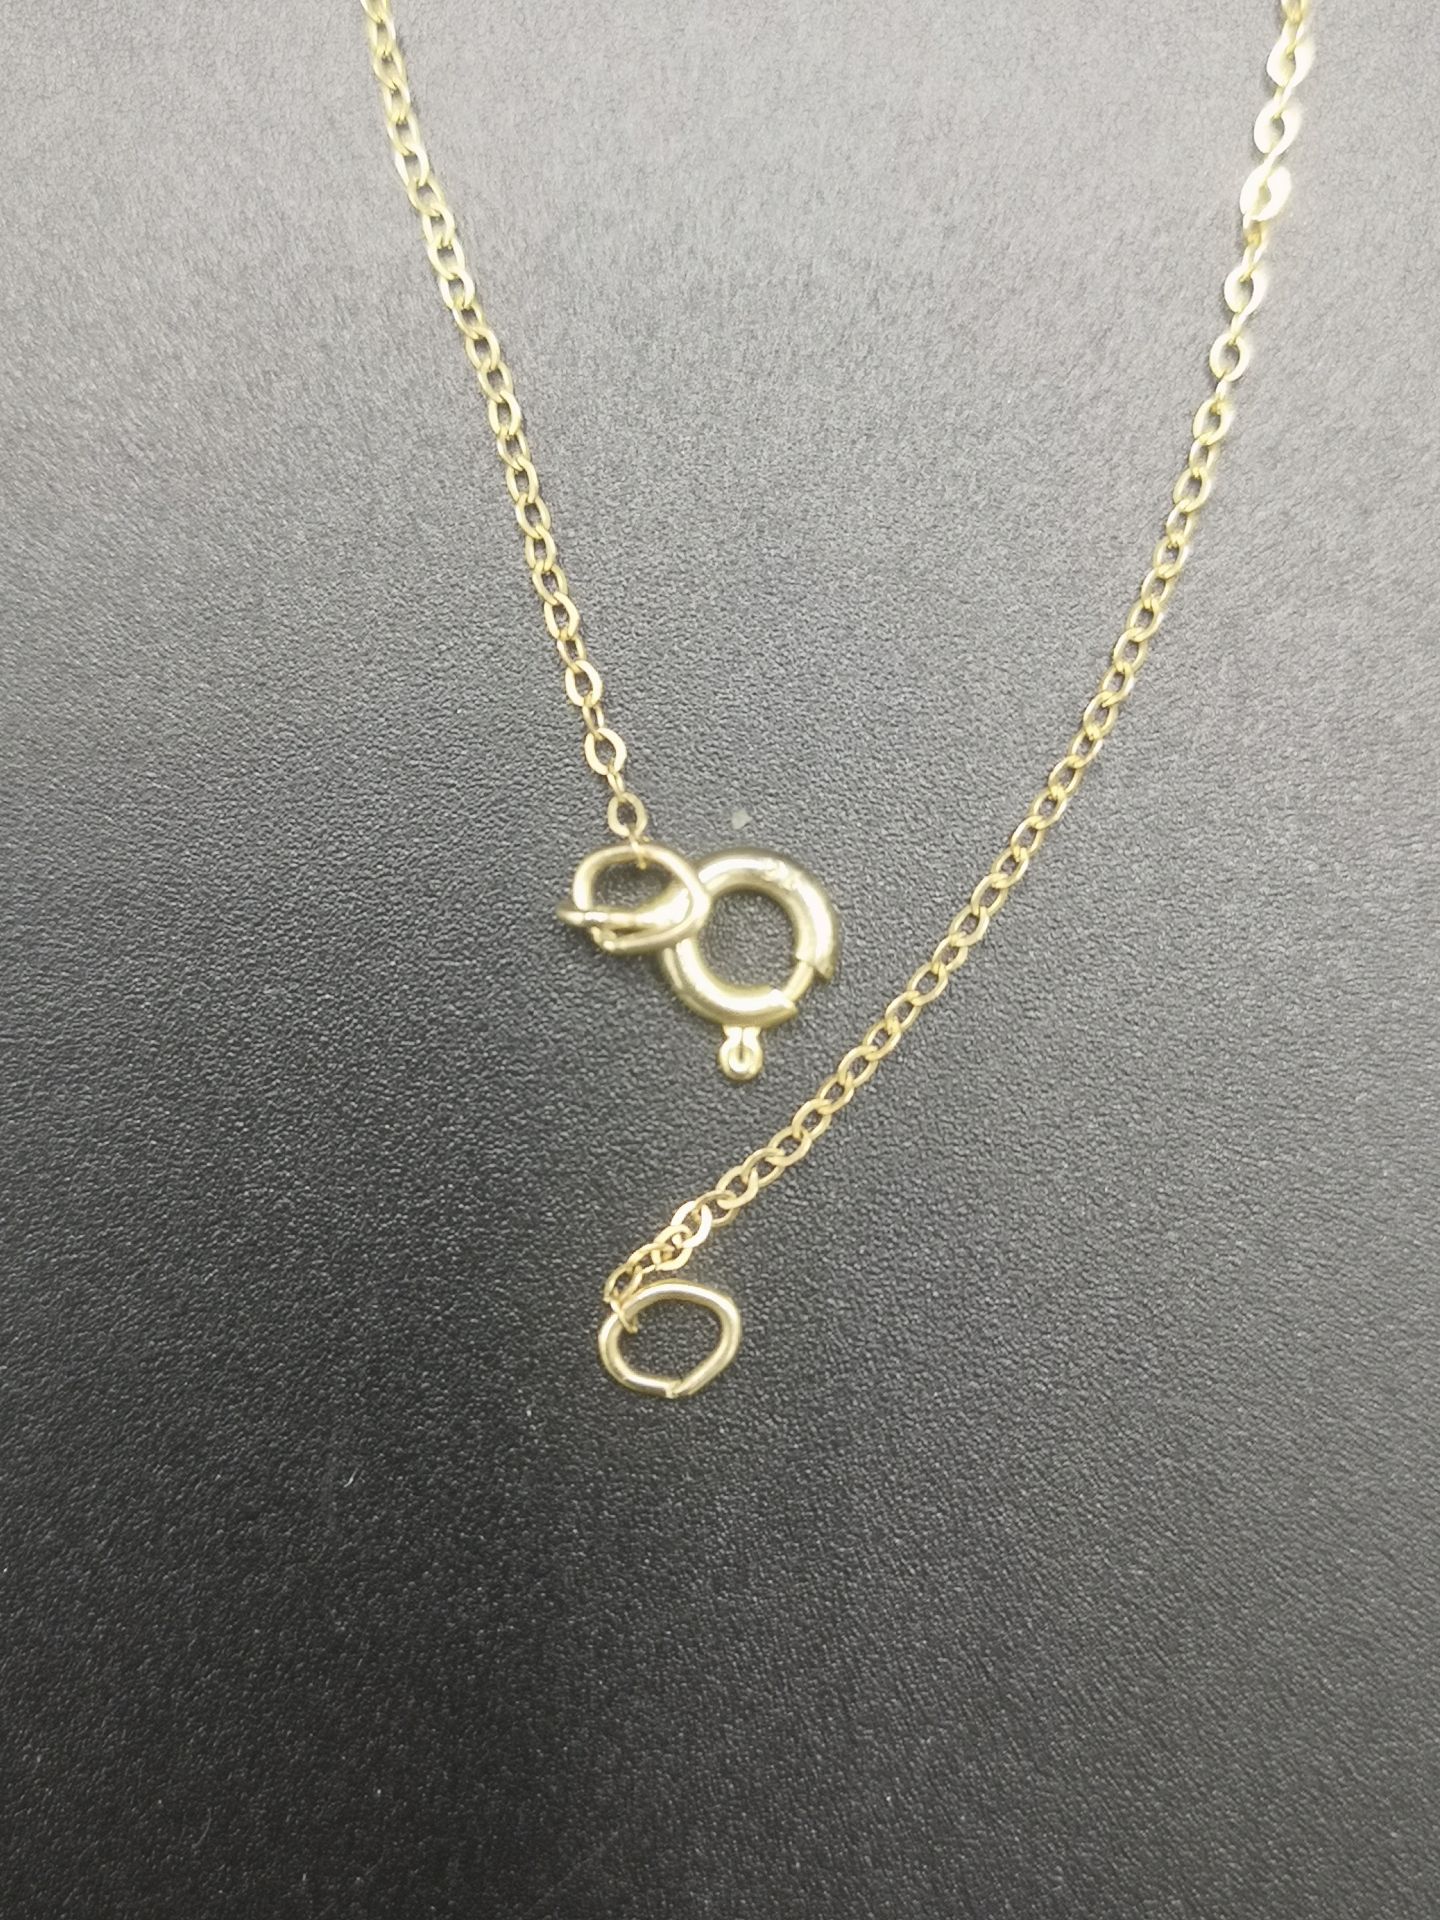 9ct gold necklace and pendant - Image 5 of 6